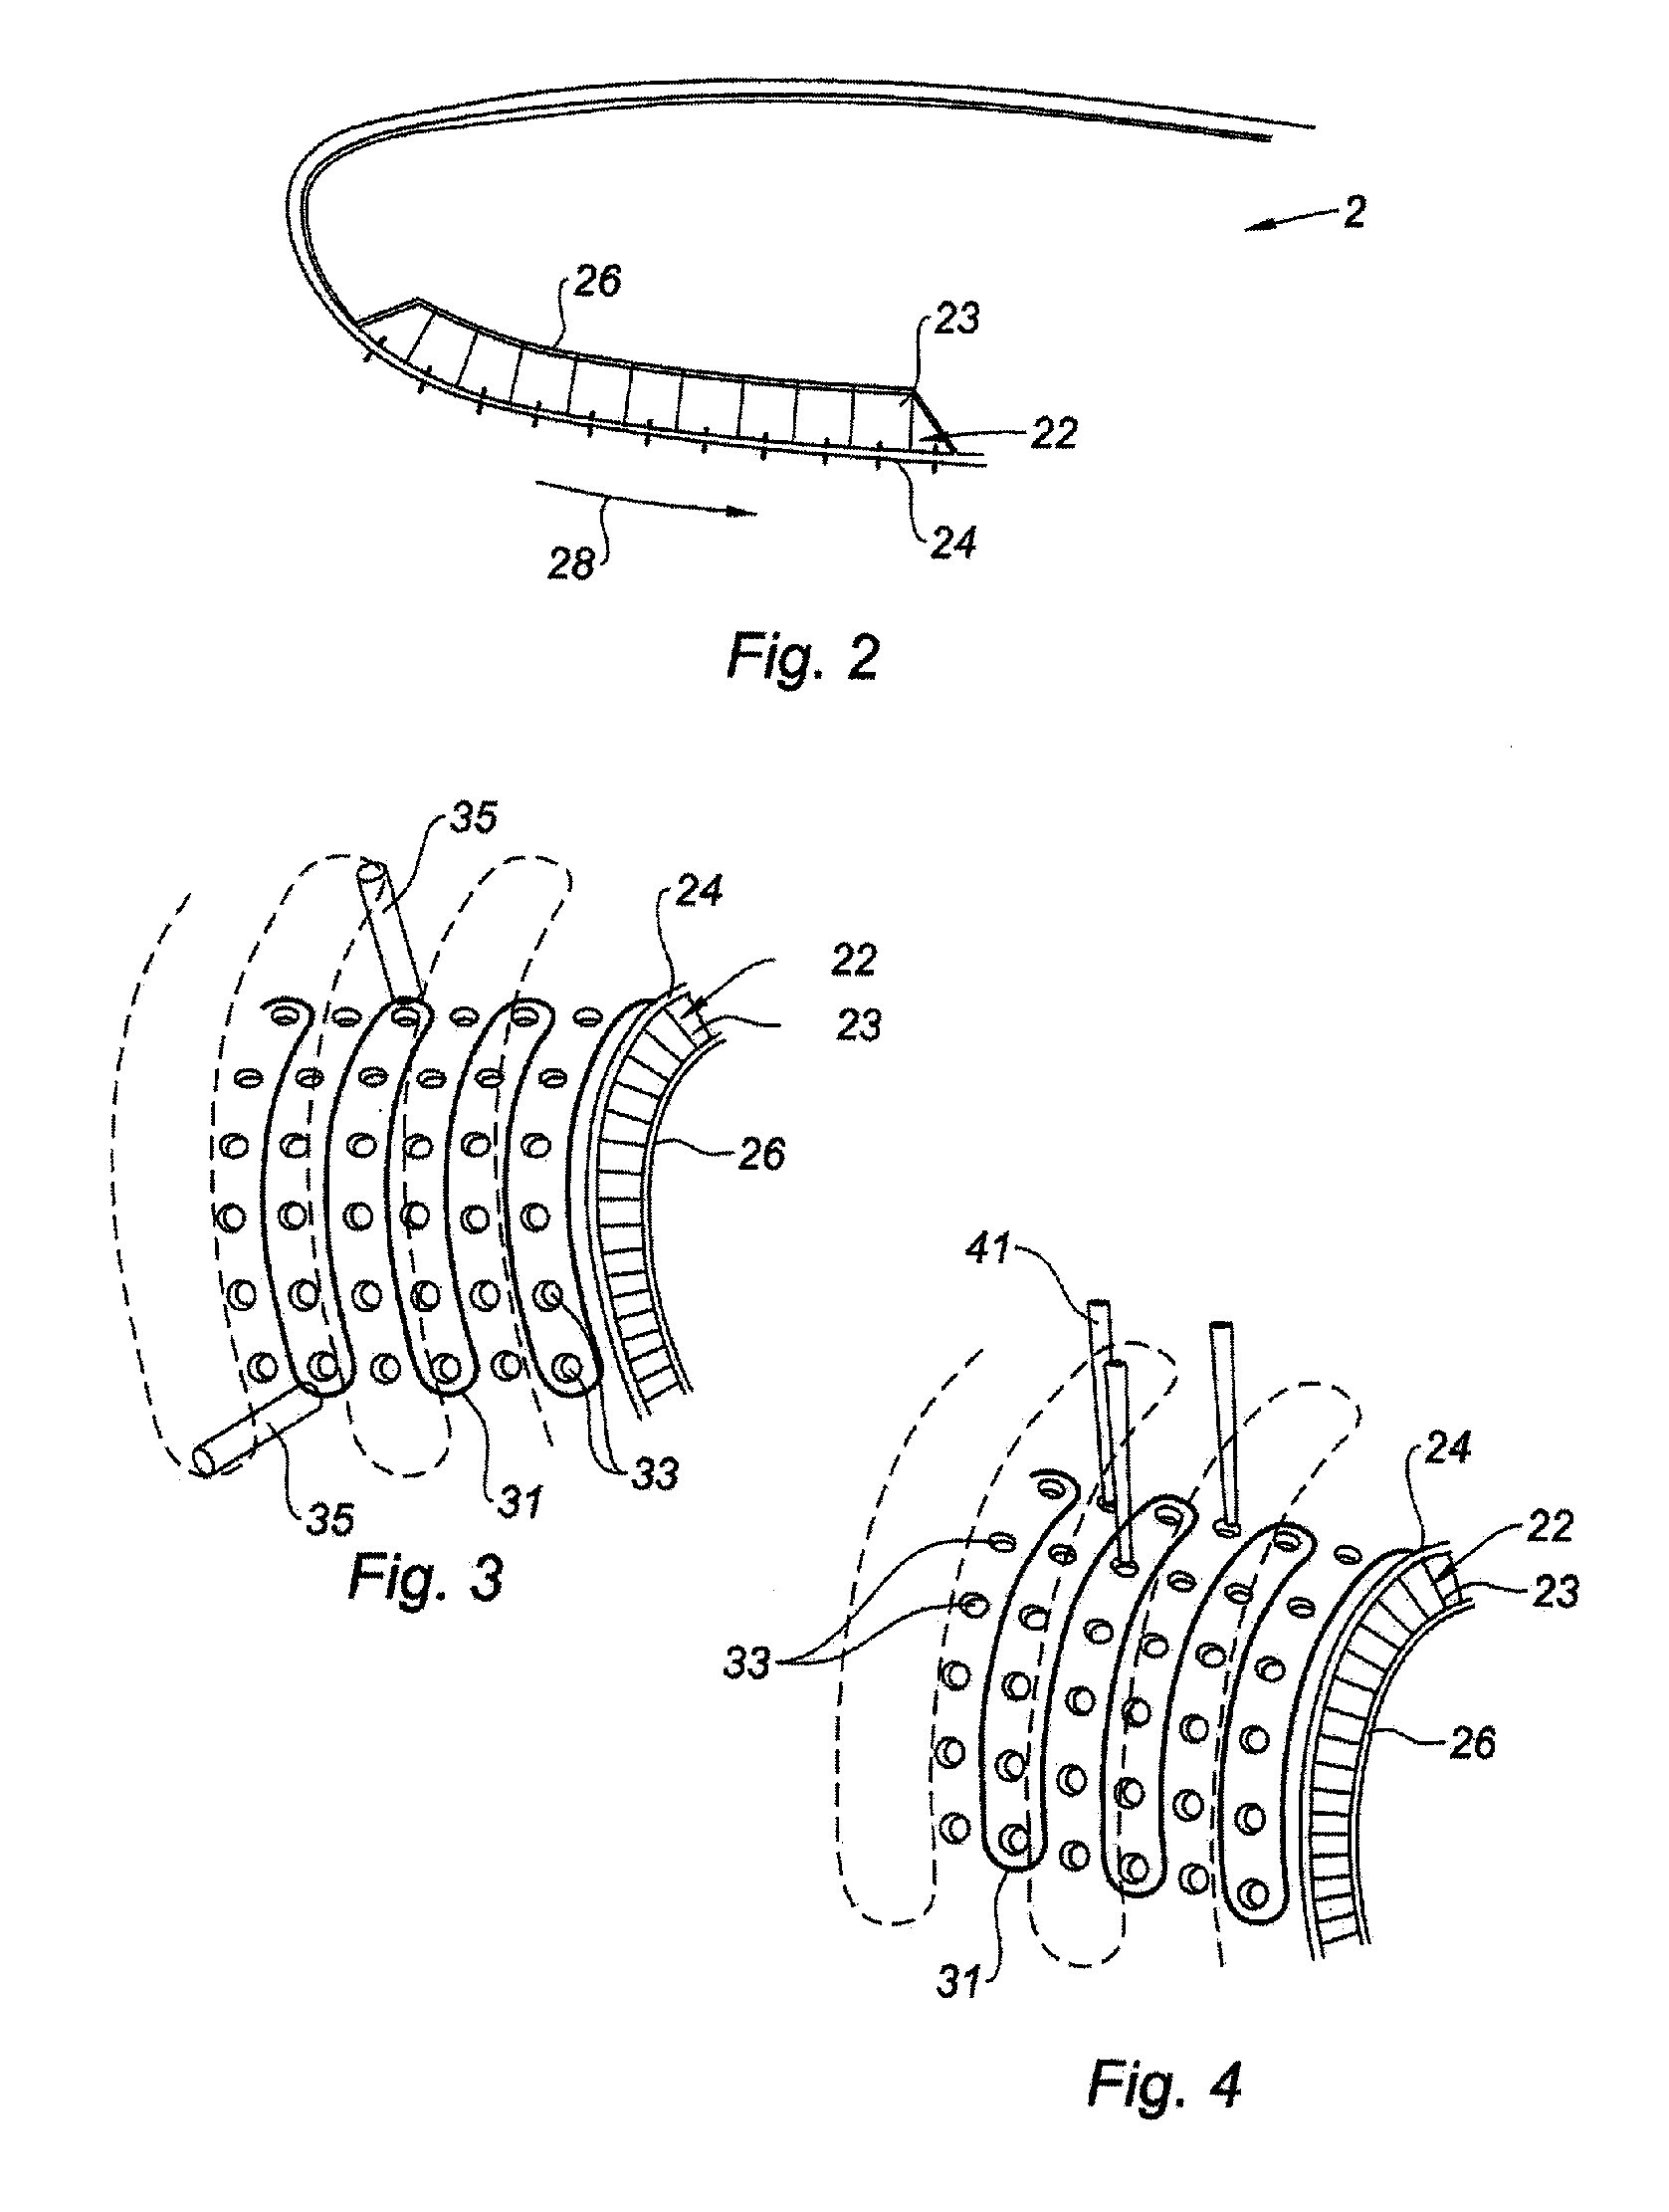 Method for making deicing system on a nacelle panel